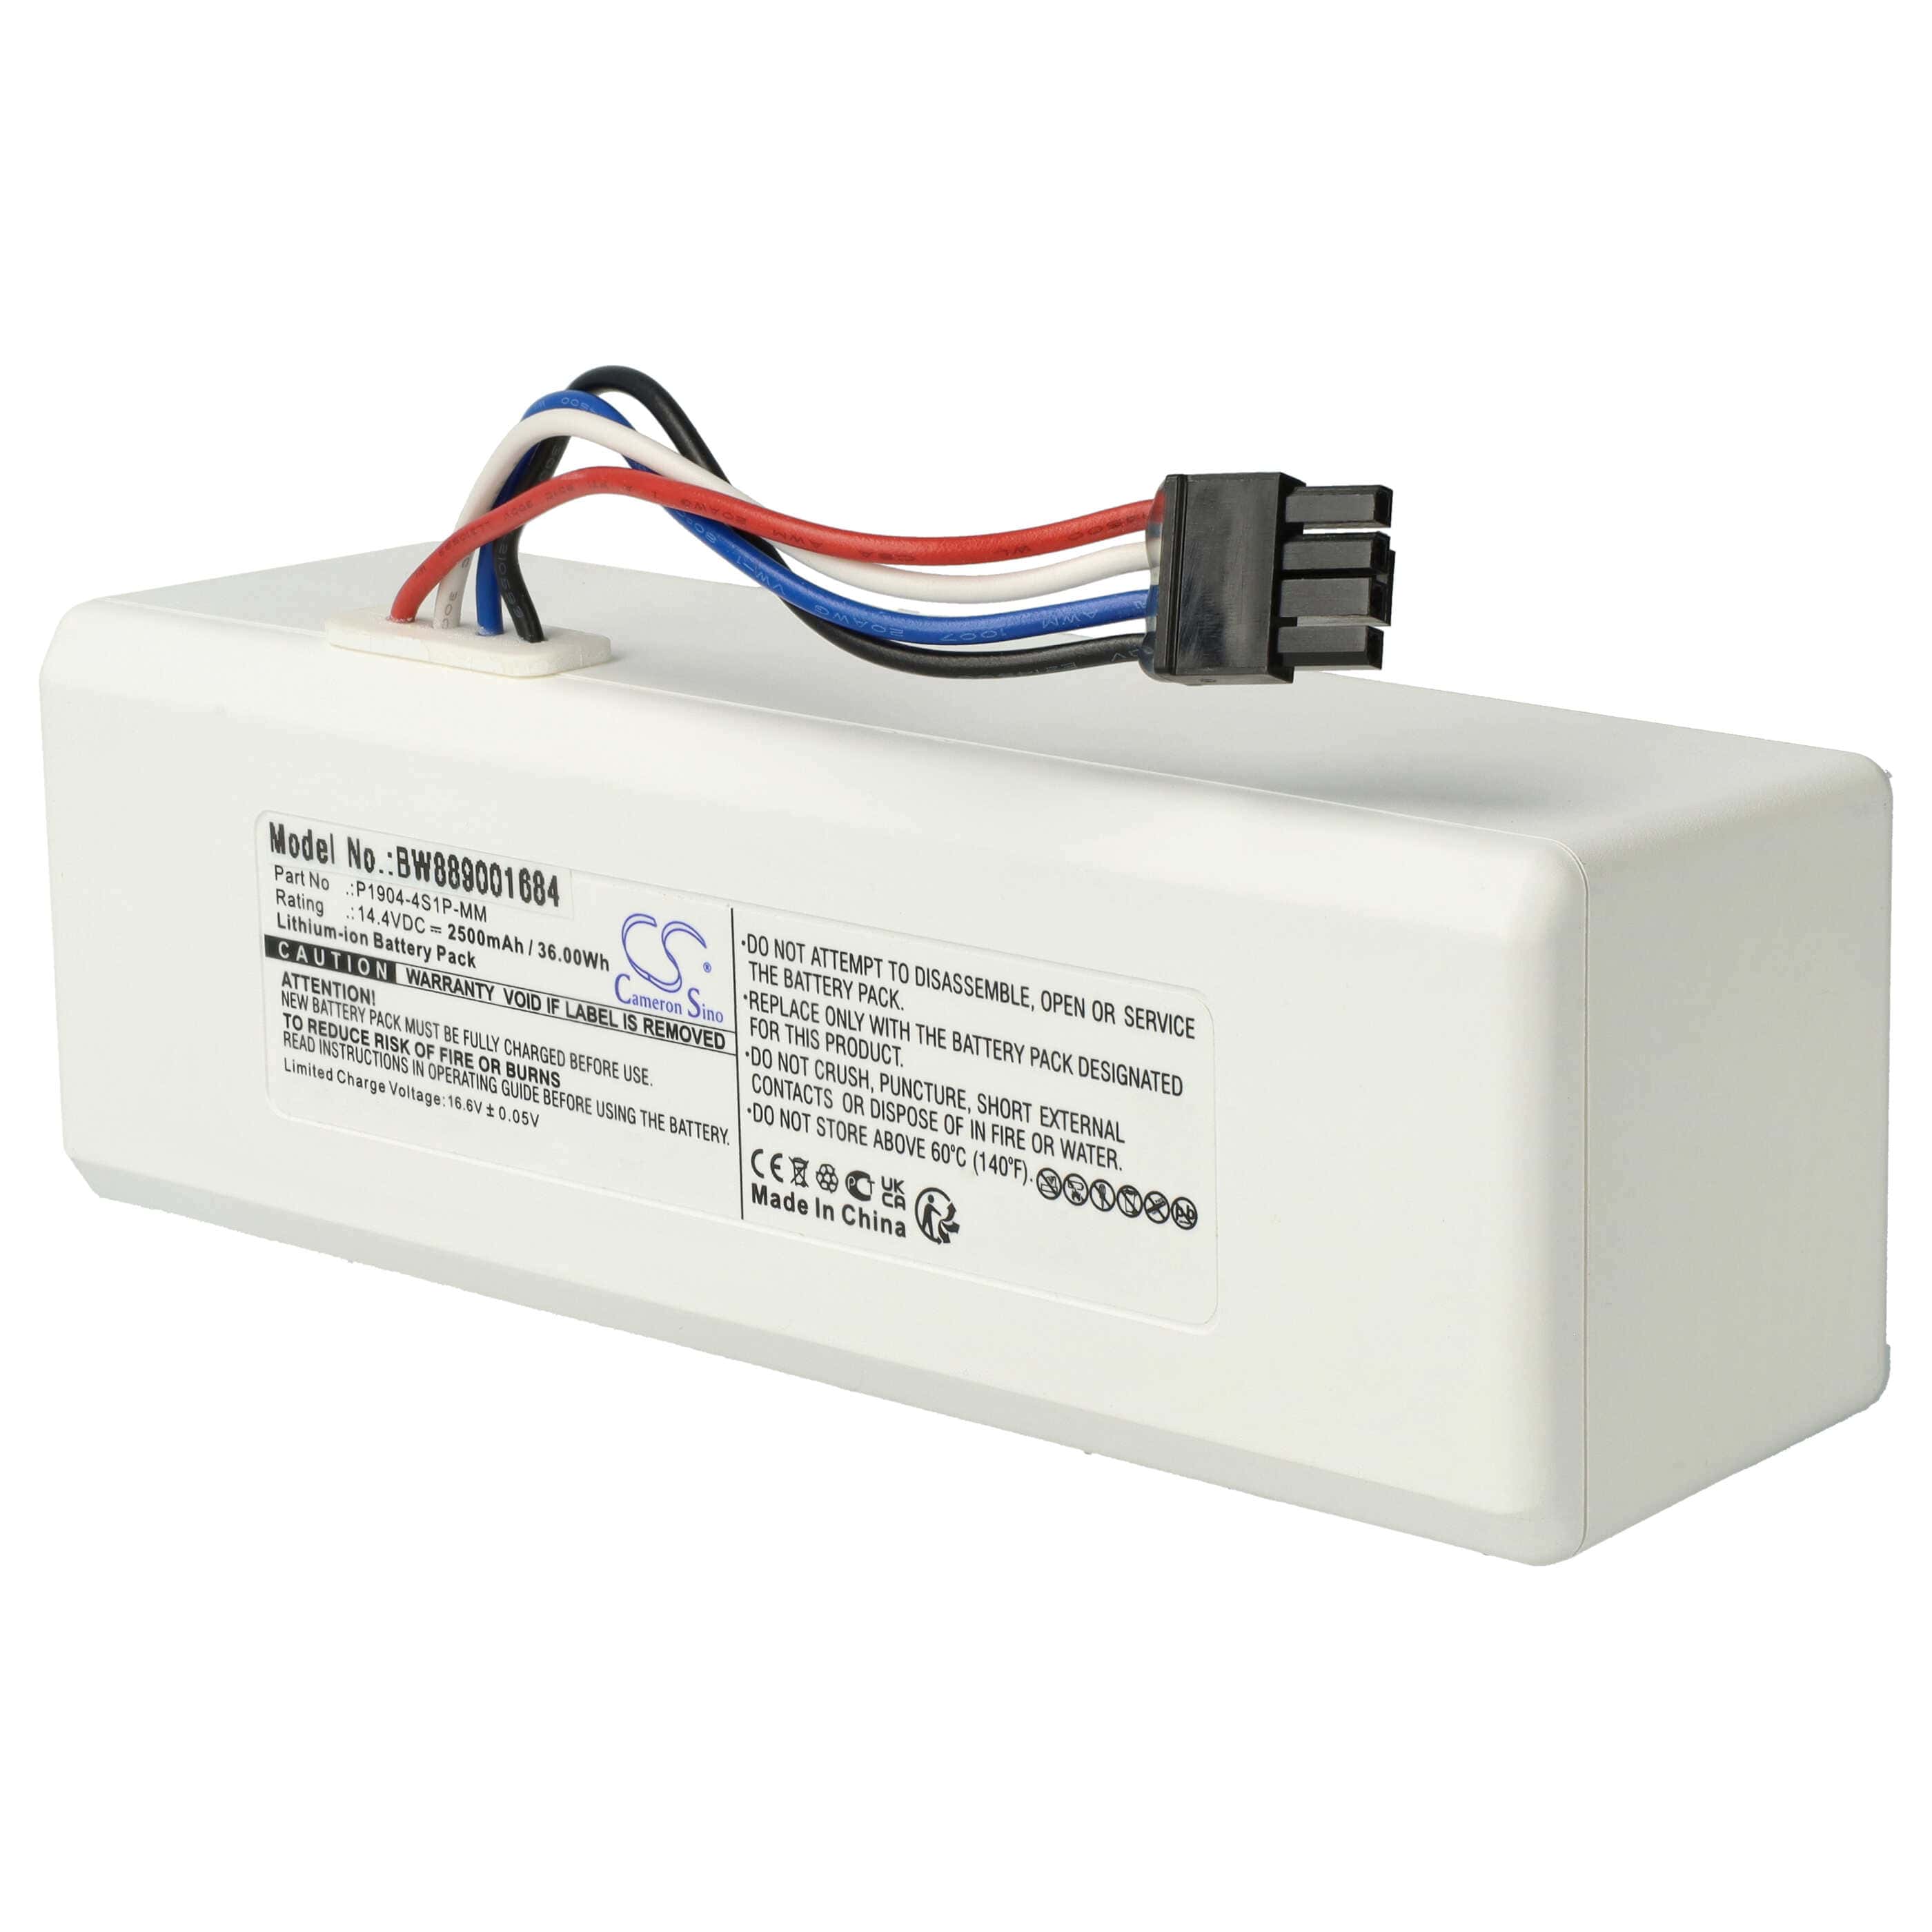 Battery Replacement for Dreame P1904-4S1P-MM for - 2500mAh, 14.4V, Li-Ion